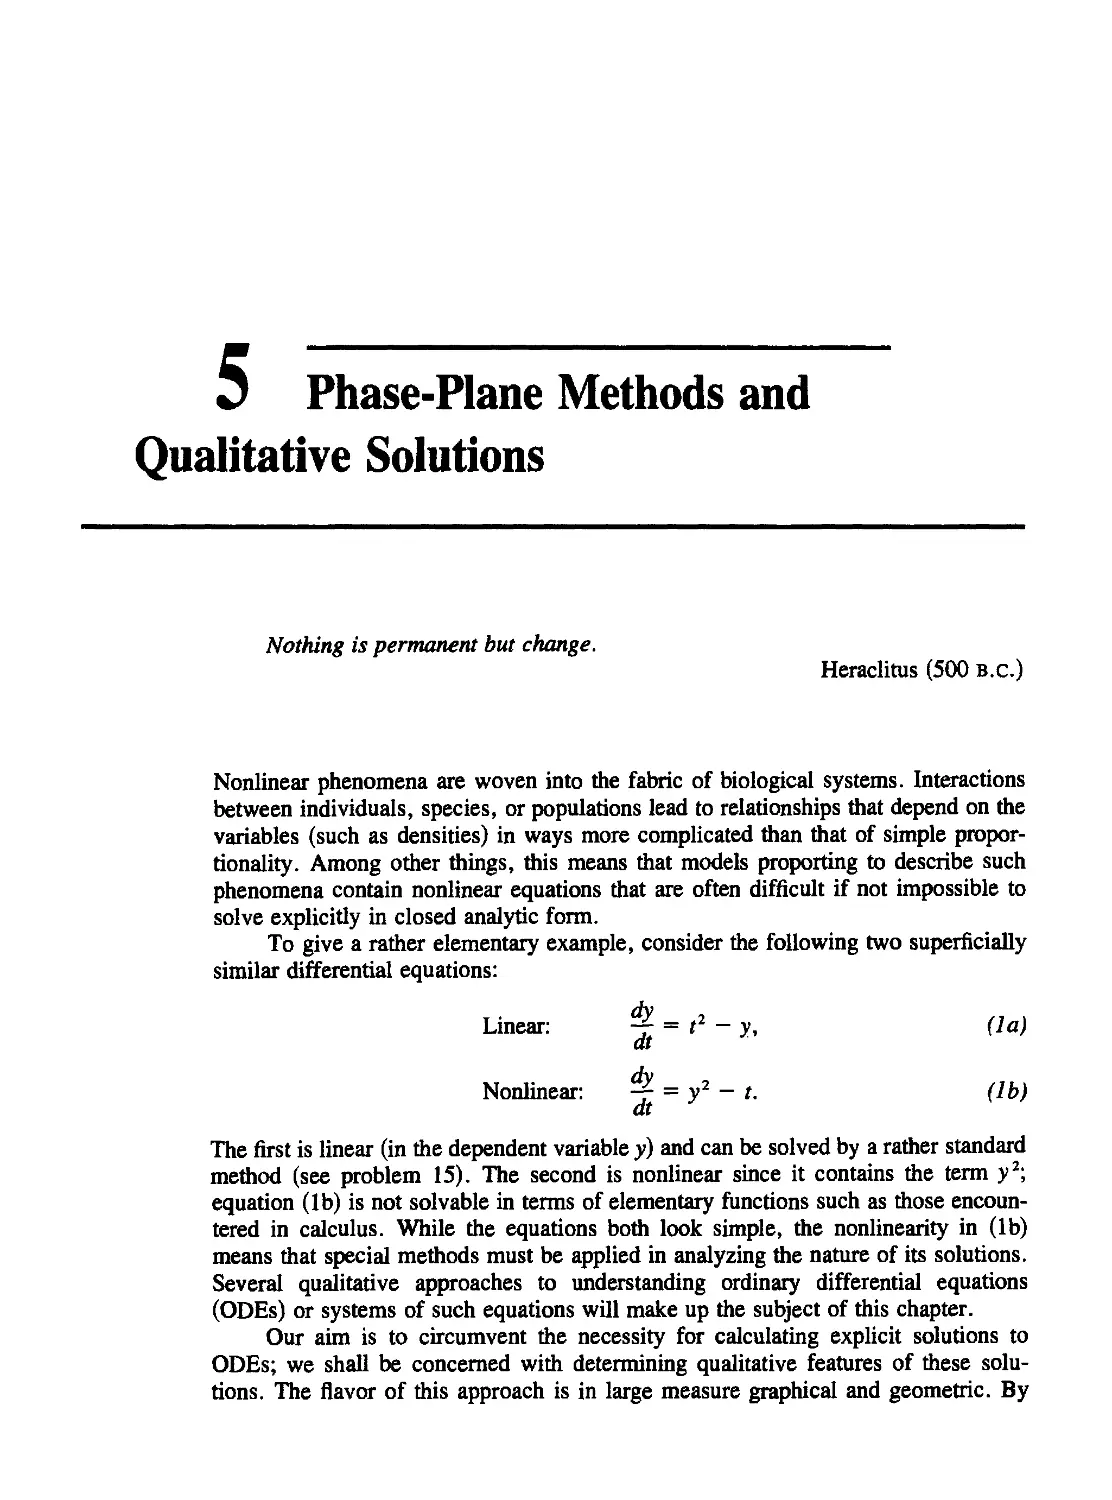 Chapter 5 Phase-Plane Methods and Qualitative Solutions